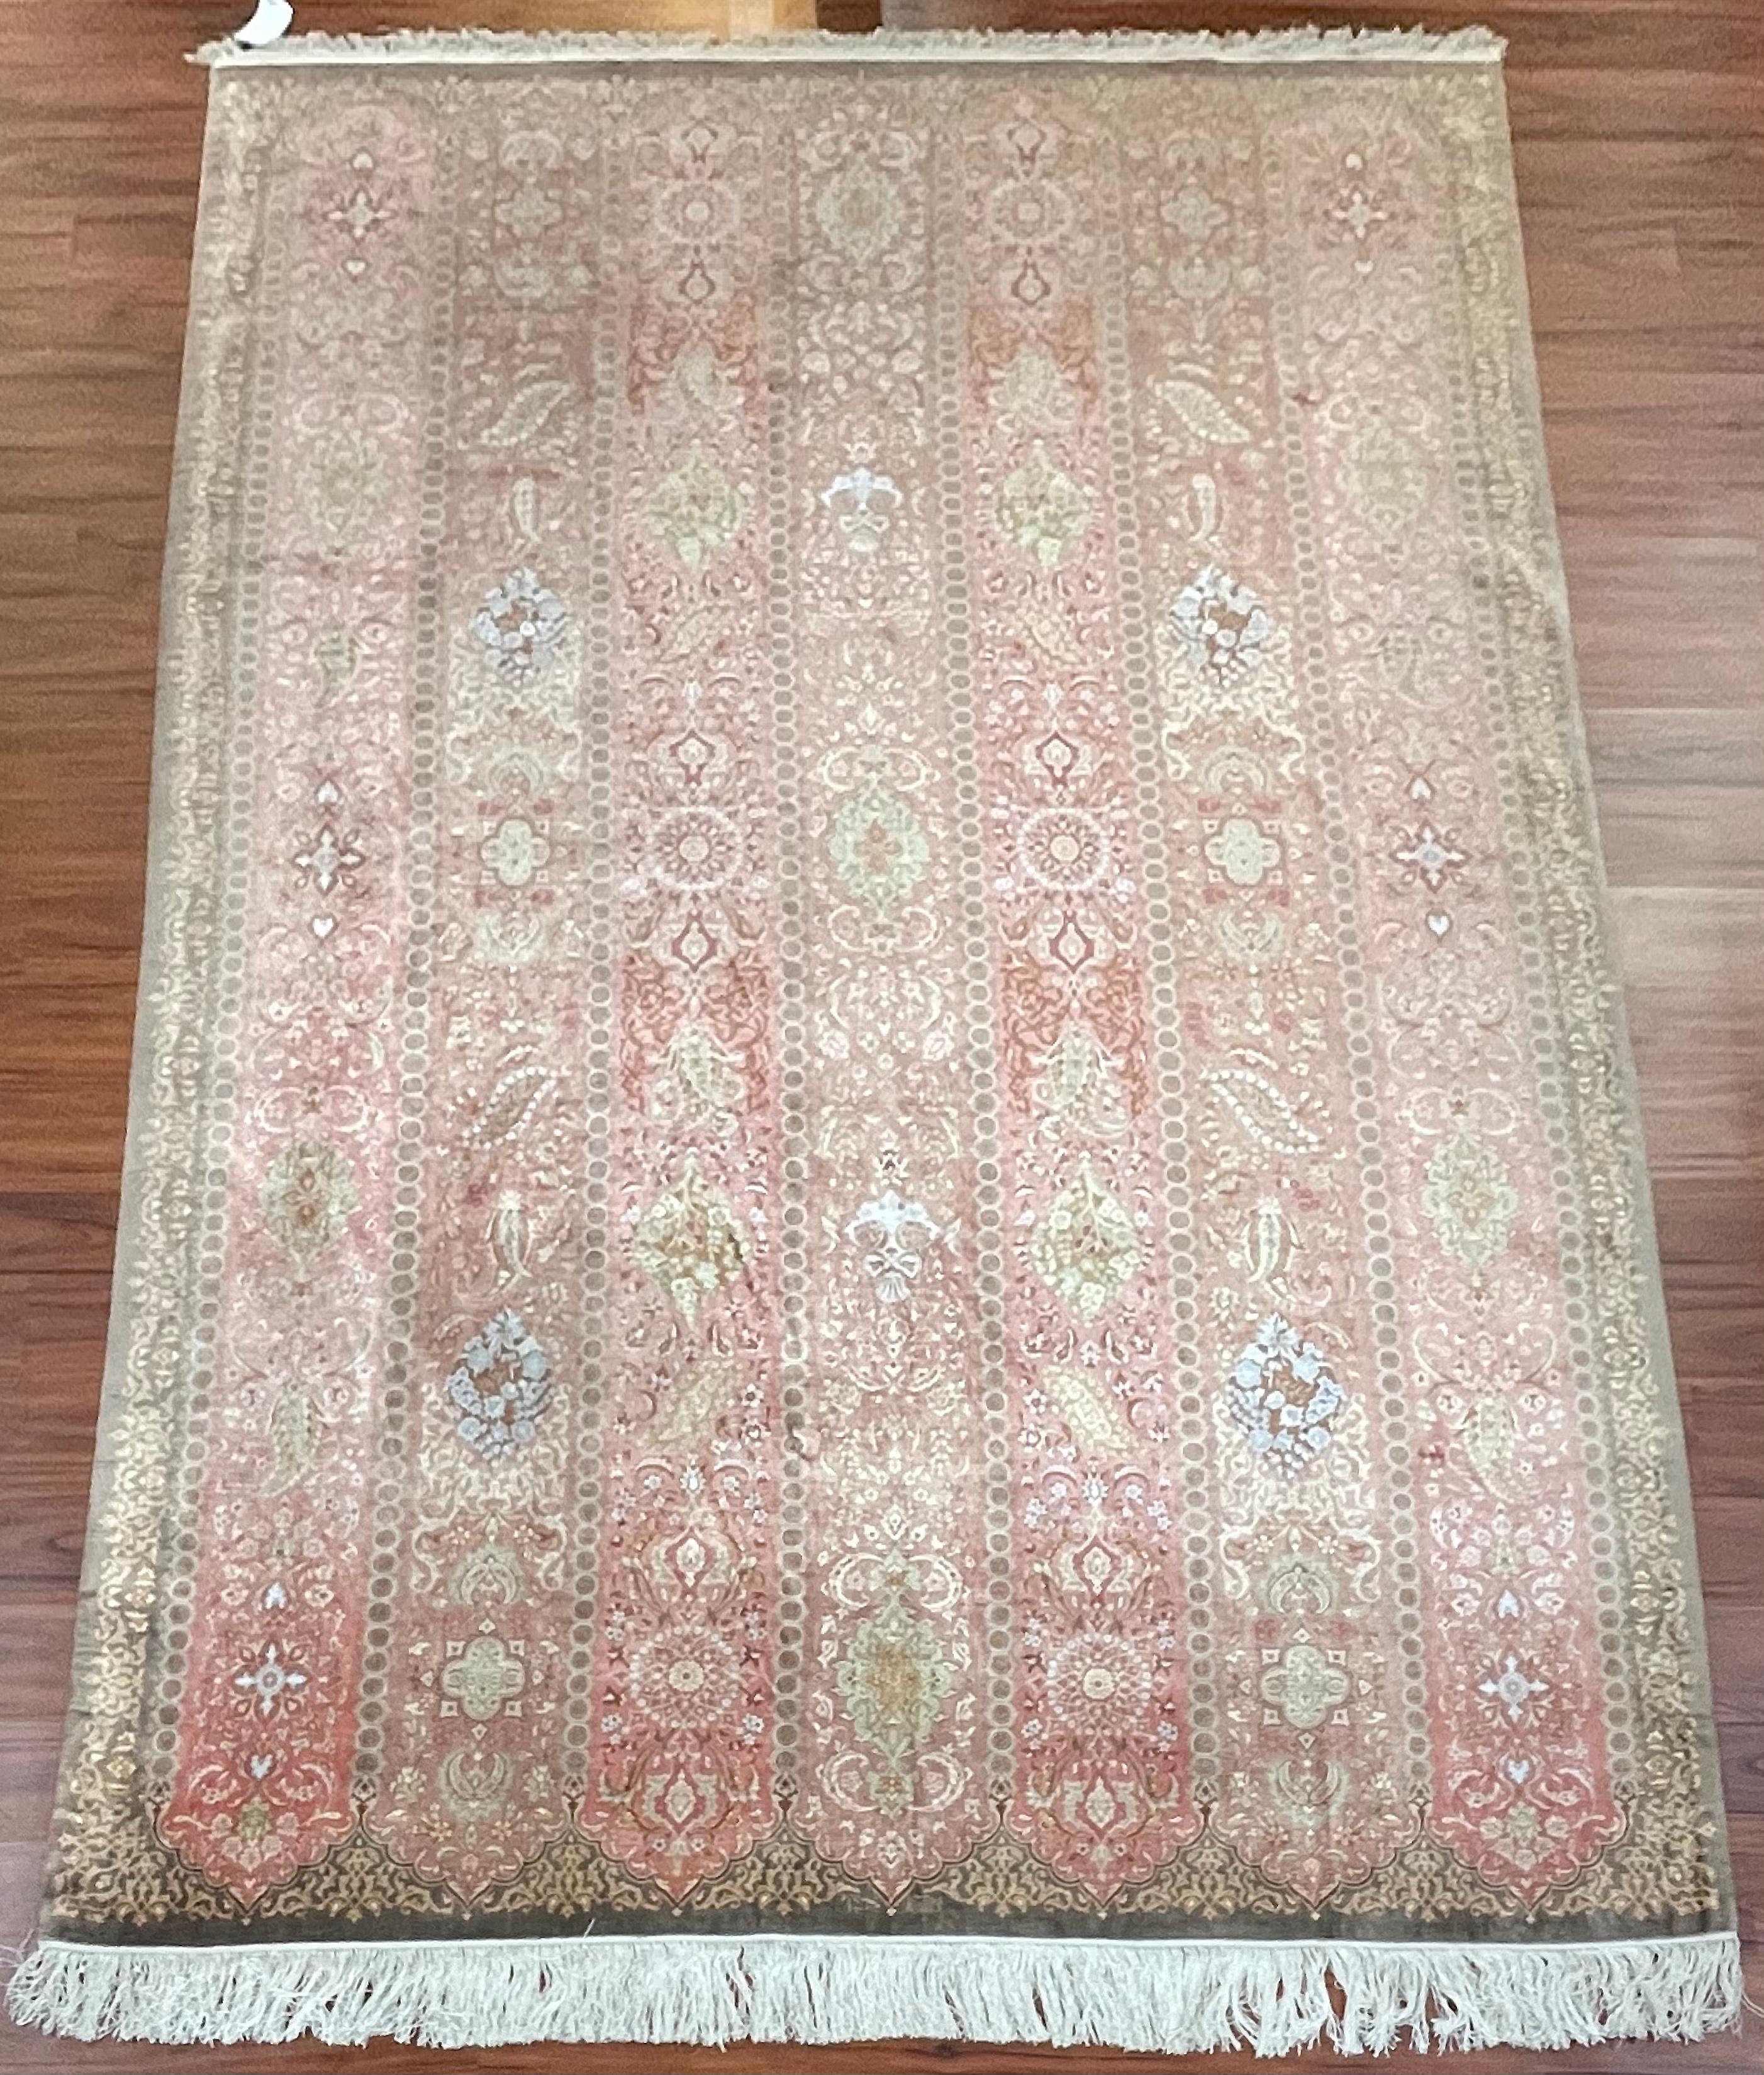 A stunning 100% silk Persian Qum rug/carpet. This piece was manufactured in the time period of the 1980’s out of Iran and is in Excellent condition. The Rug measures to be 6ft 7in in width and 9ft 11in in length. Feel free to message me with any